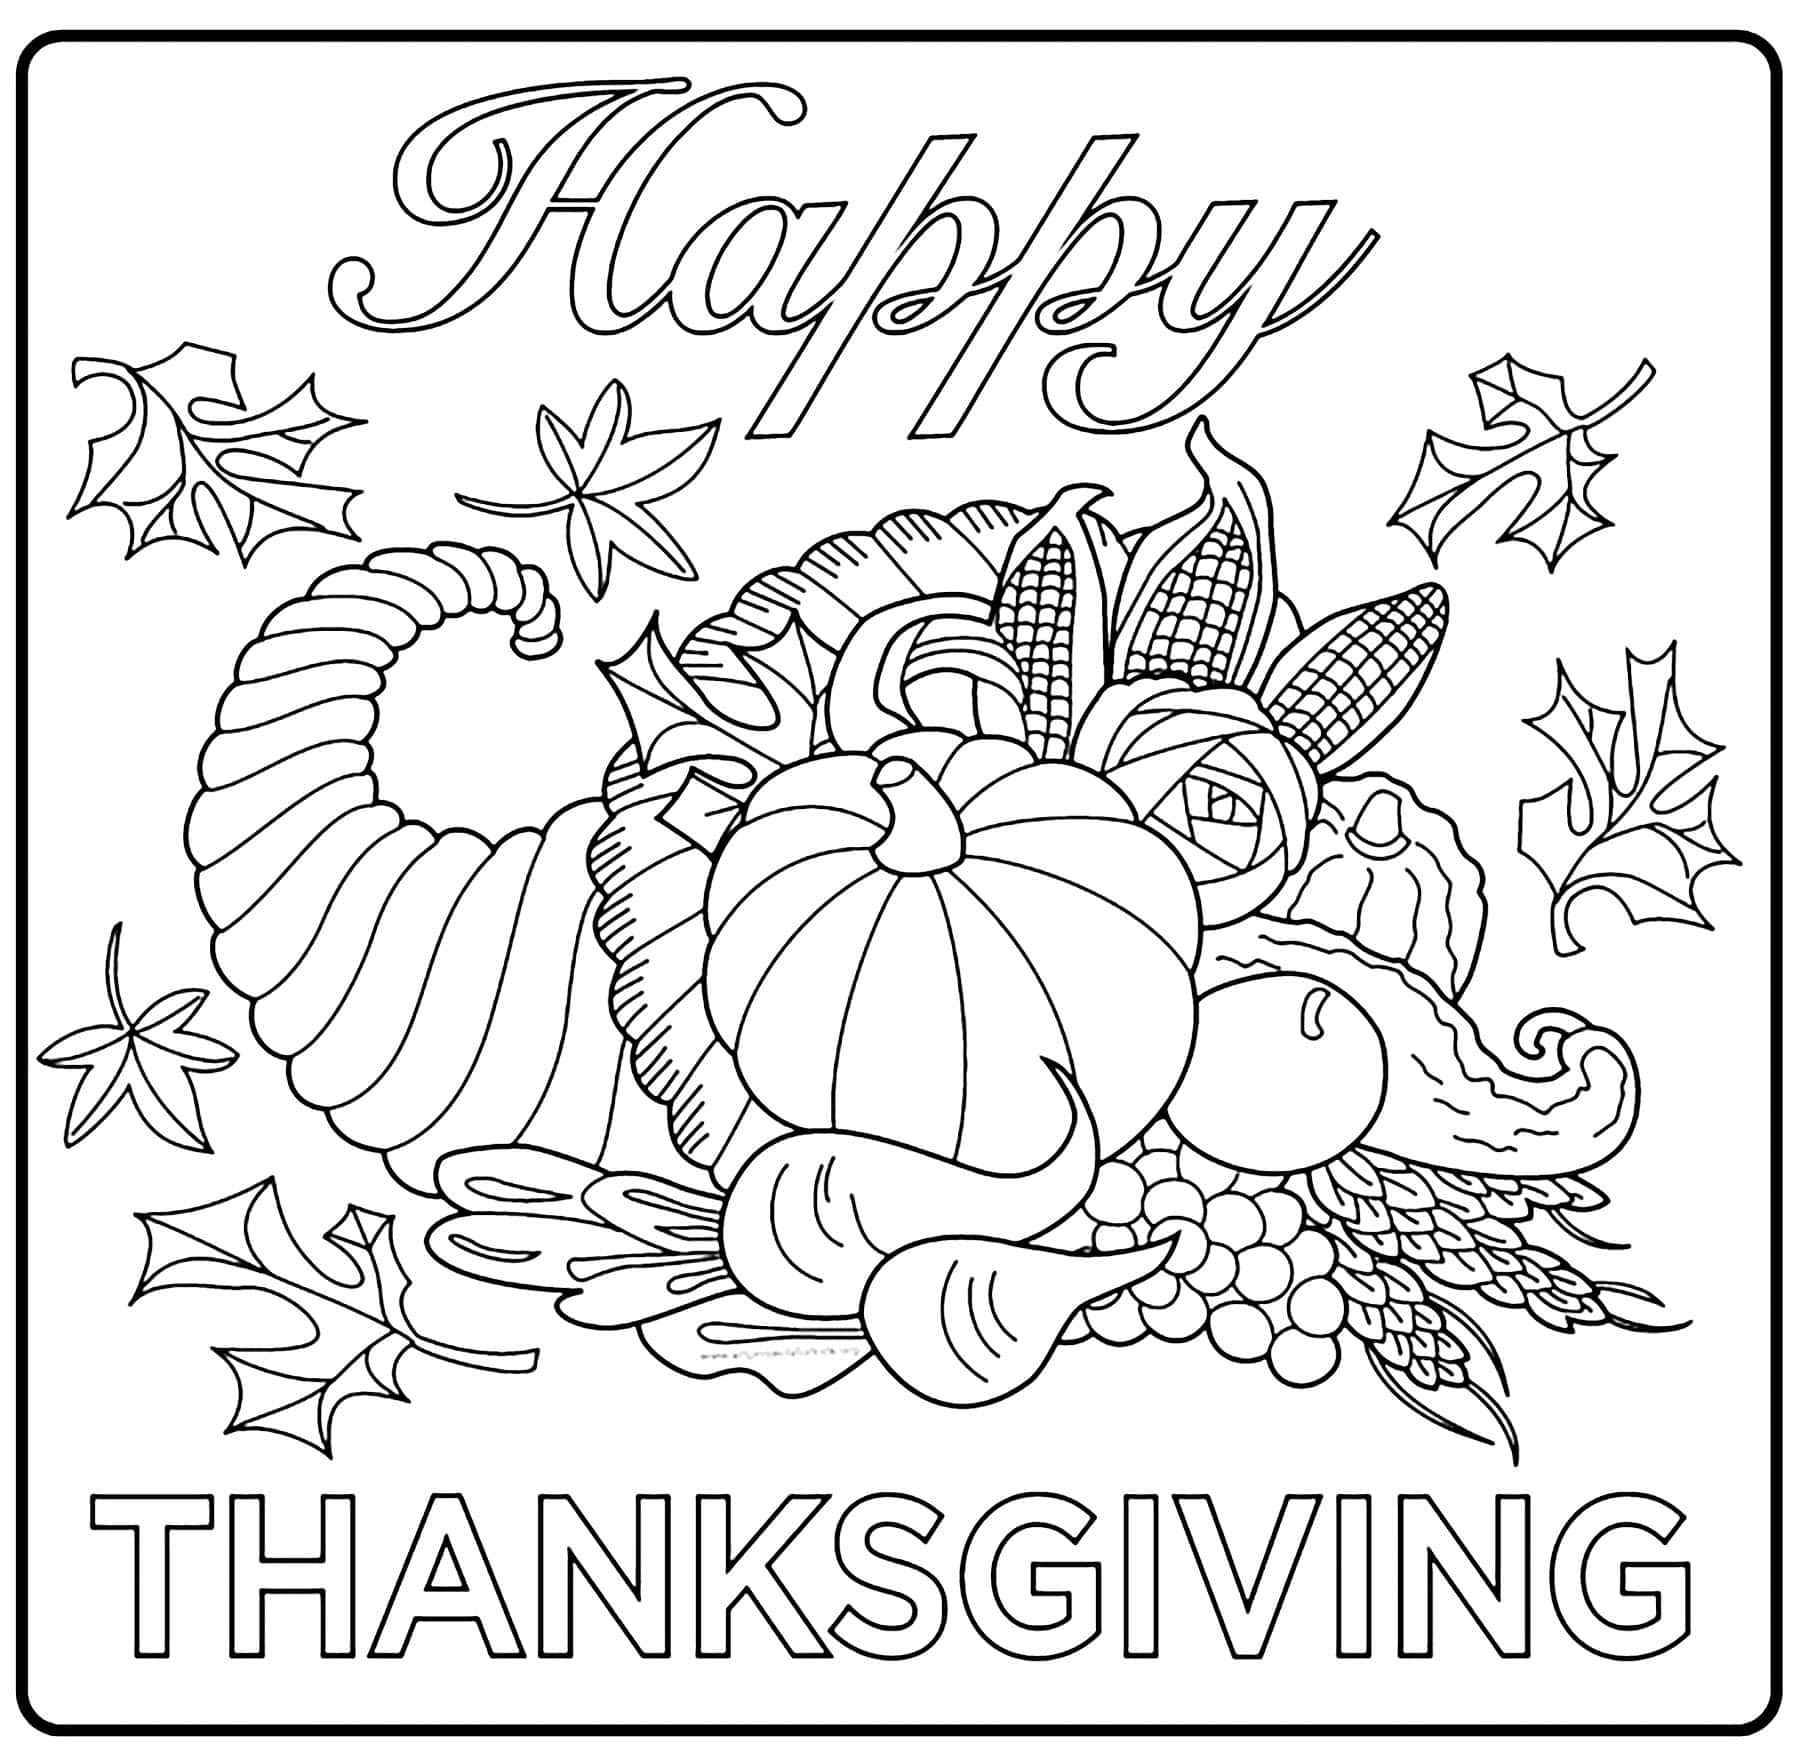 download-thanksgiving-coloring-pages-for-kids-wallpapers